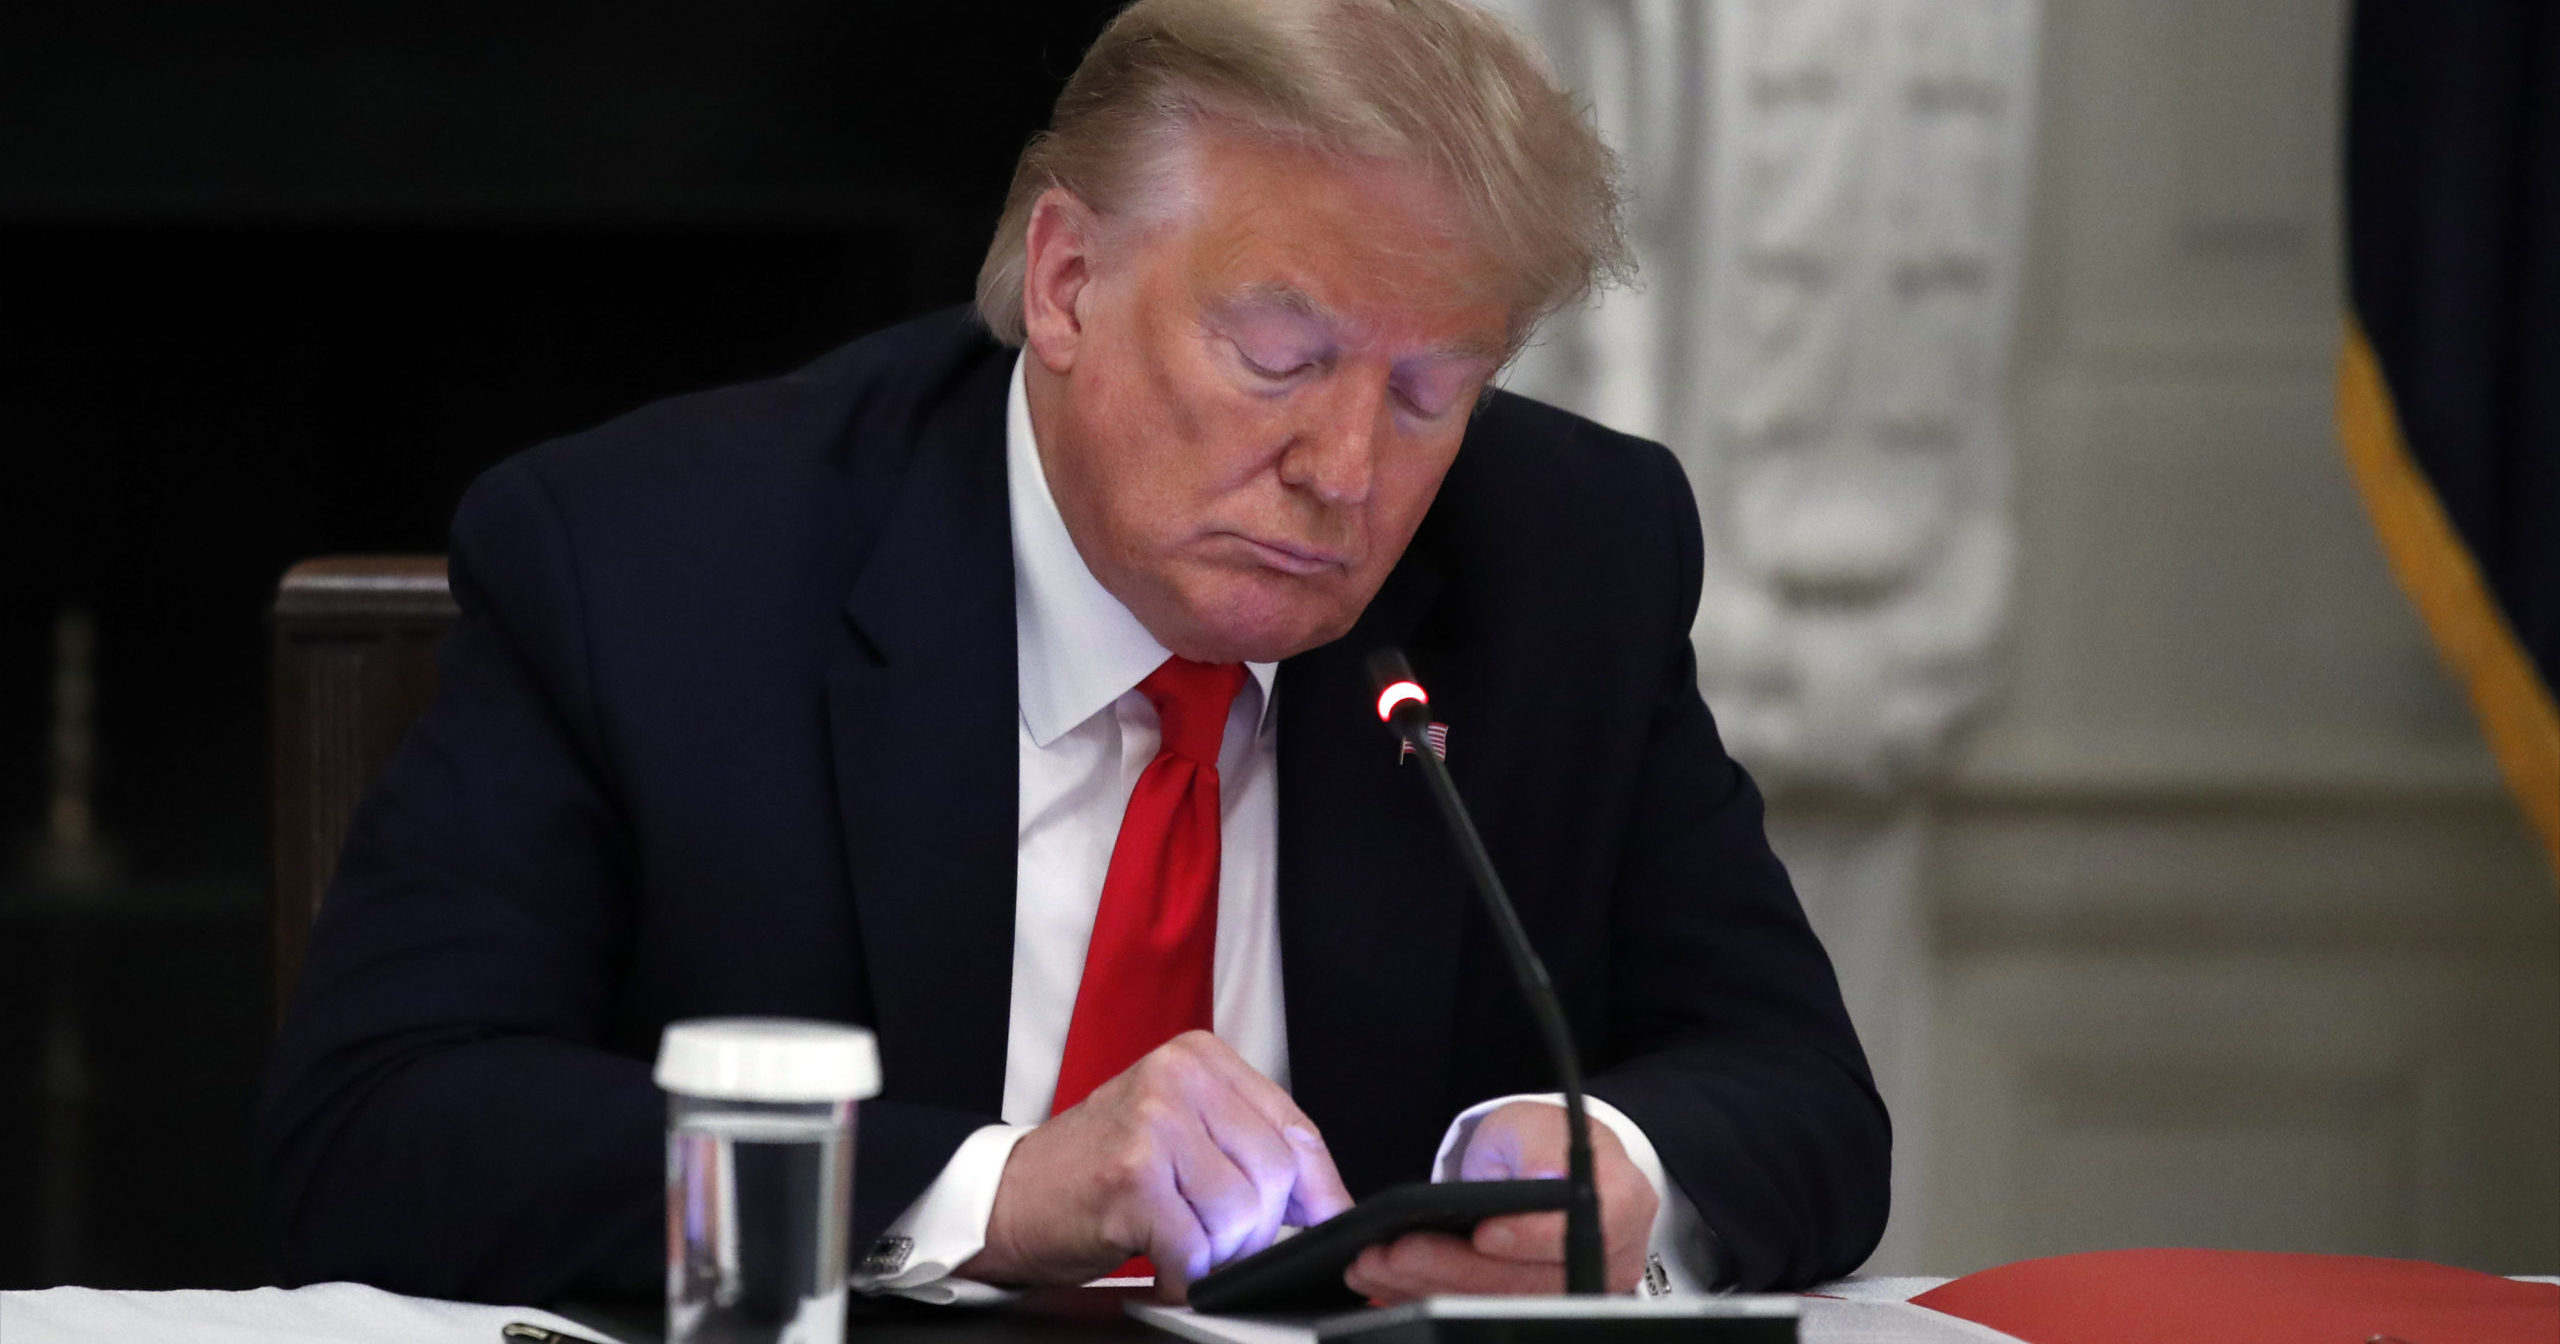 President Donald Trump looks at his phone during a roundtable with governors June 18 in the State Dining Room of the White House in Washington.